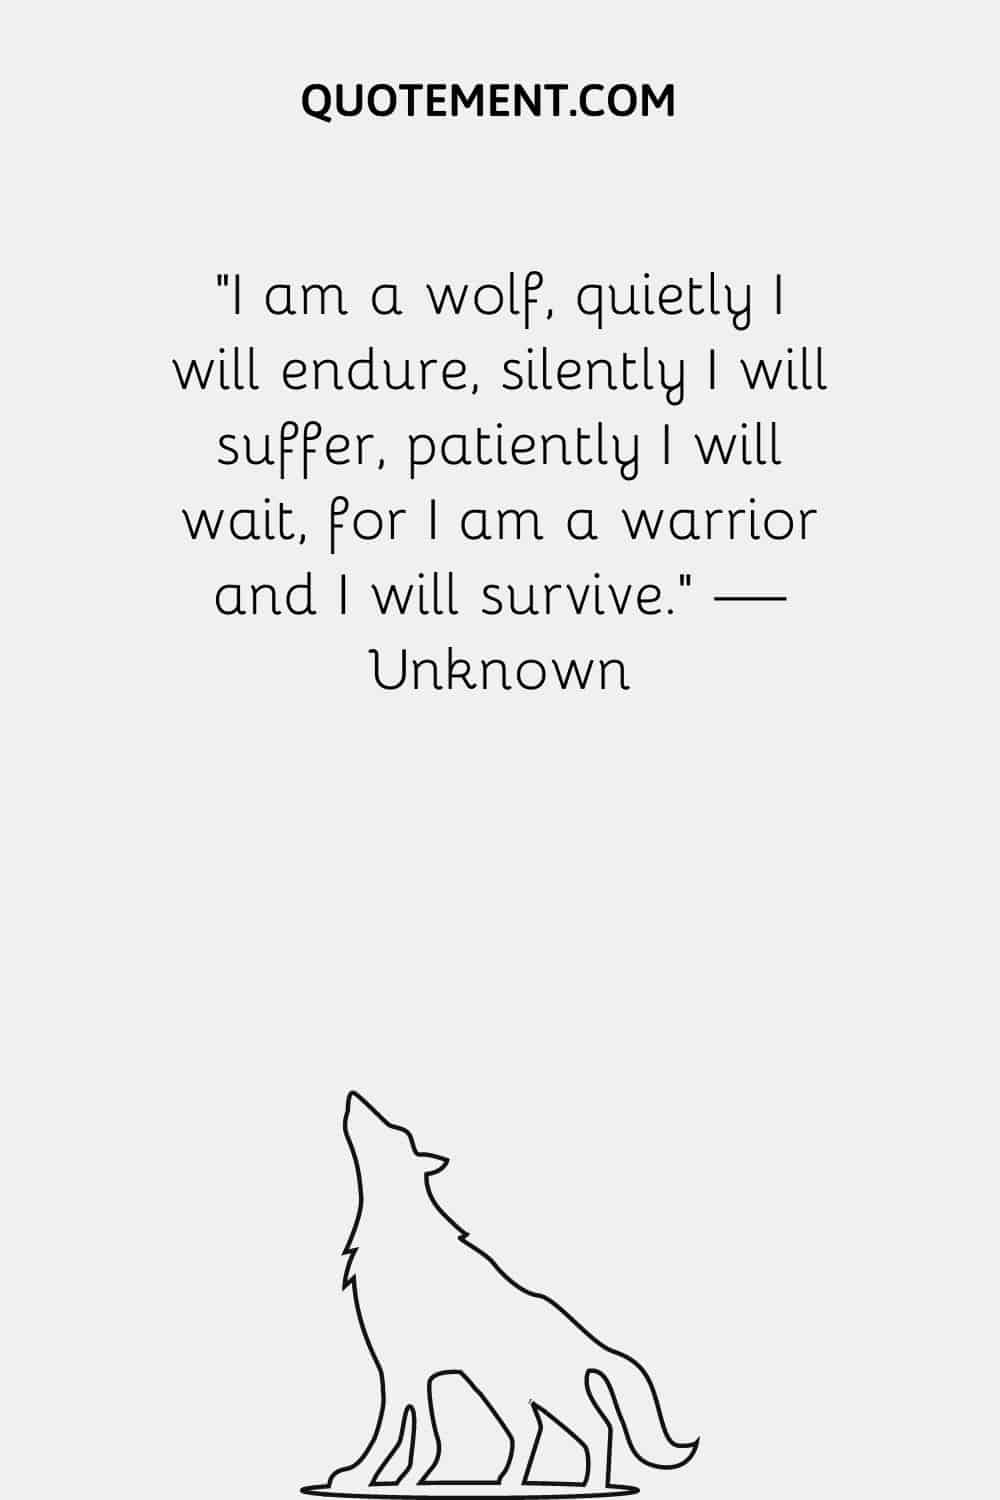 illustration of a wolf howling representing warrior wolf quote